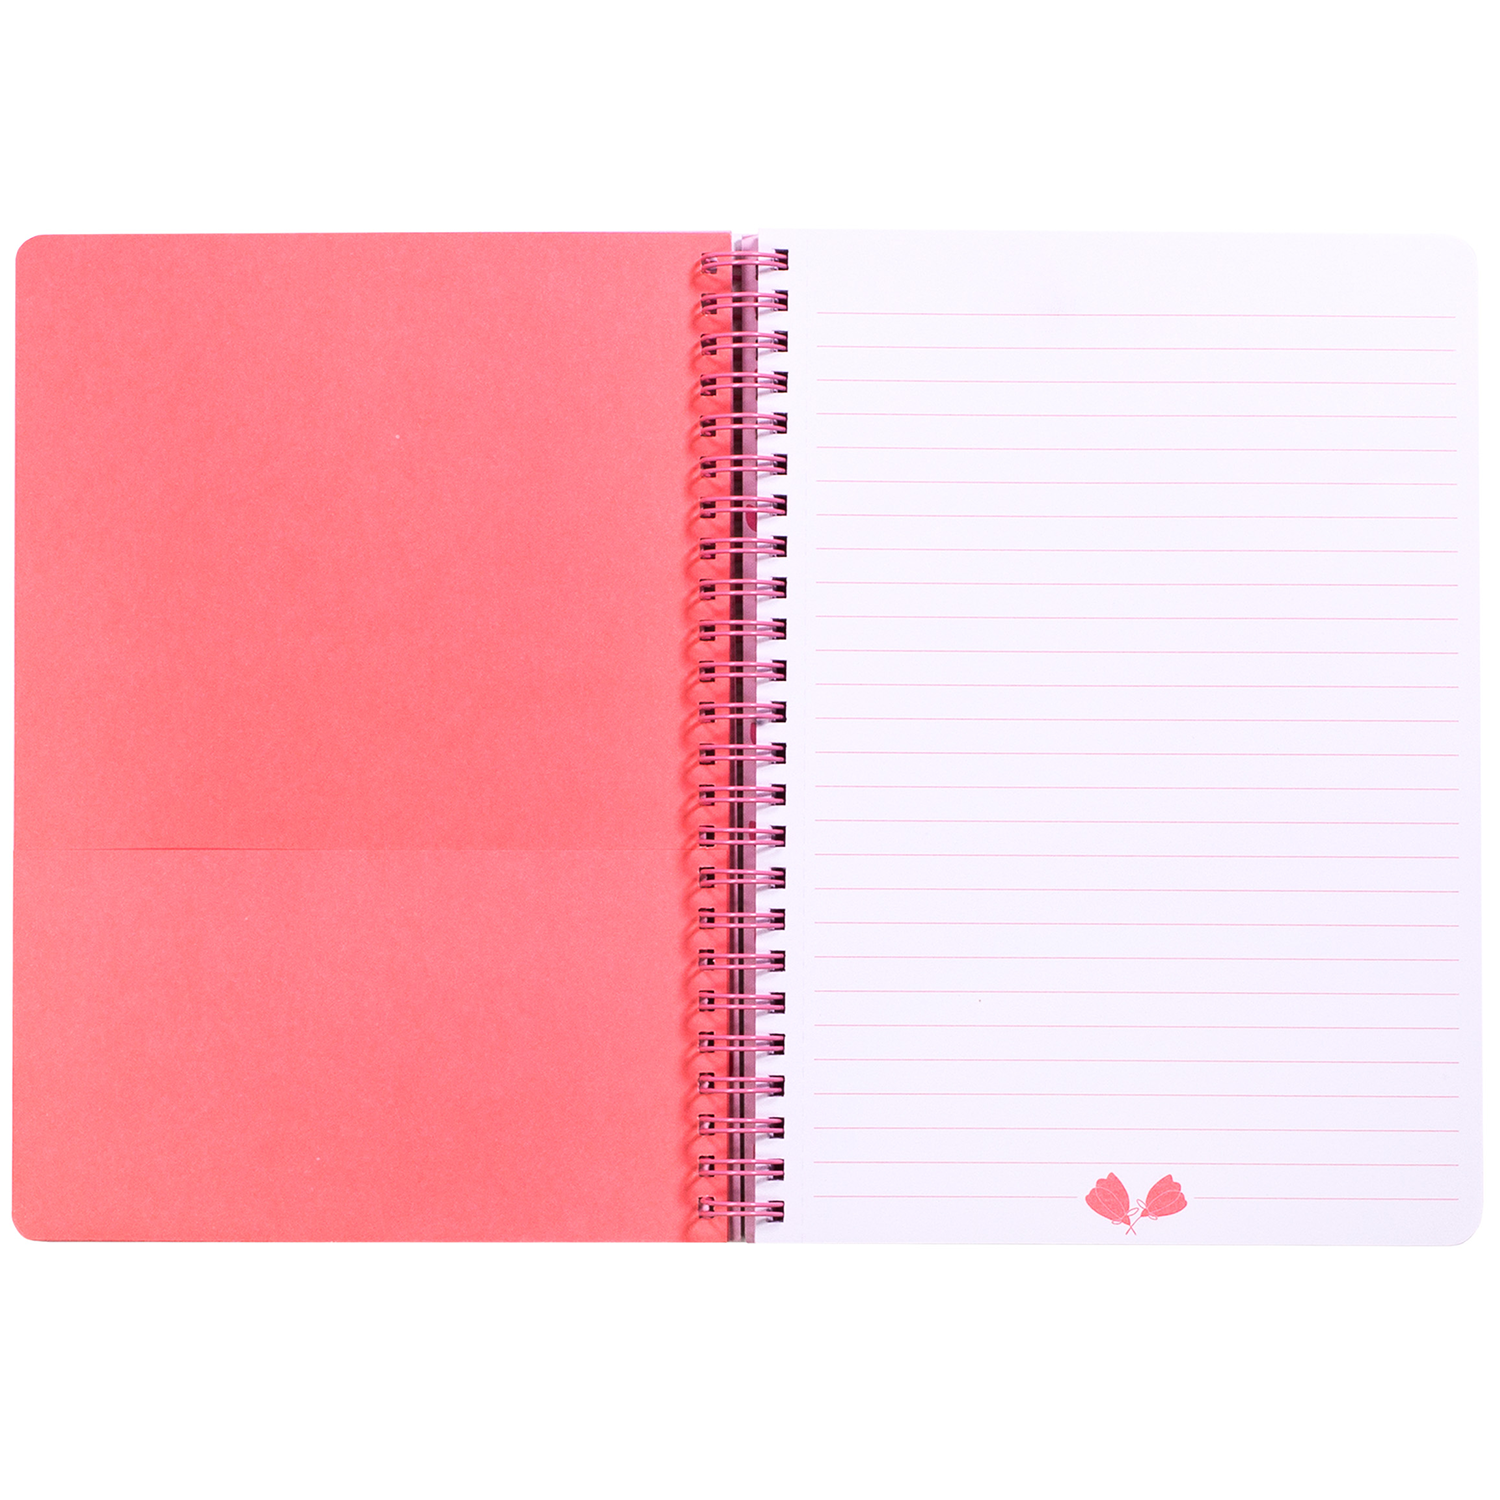 pink mini spiral notebook with floral bouquet hardcover, metal spiral and 160 lined pages for school or office supplies